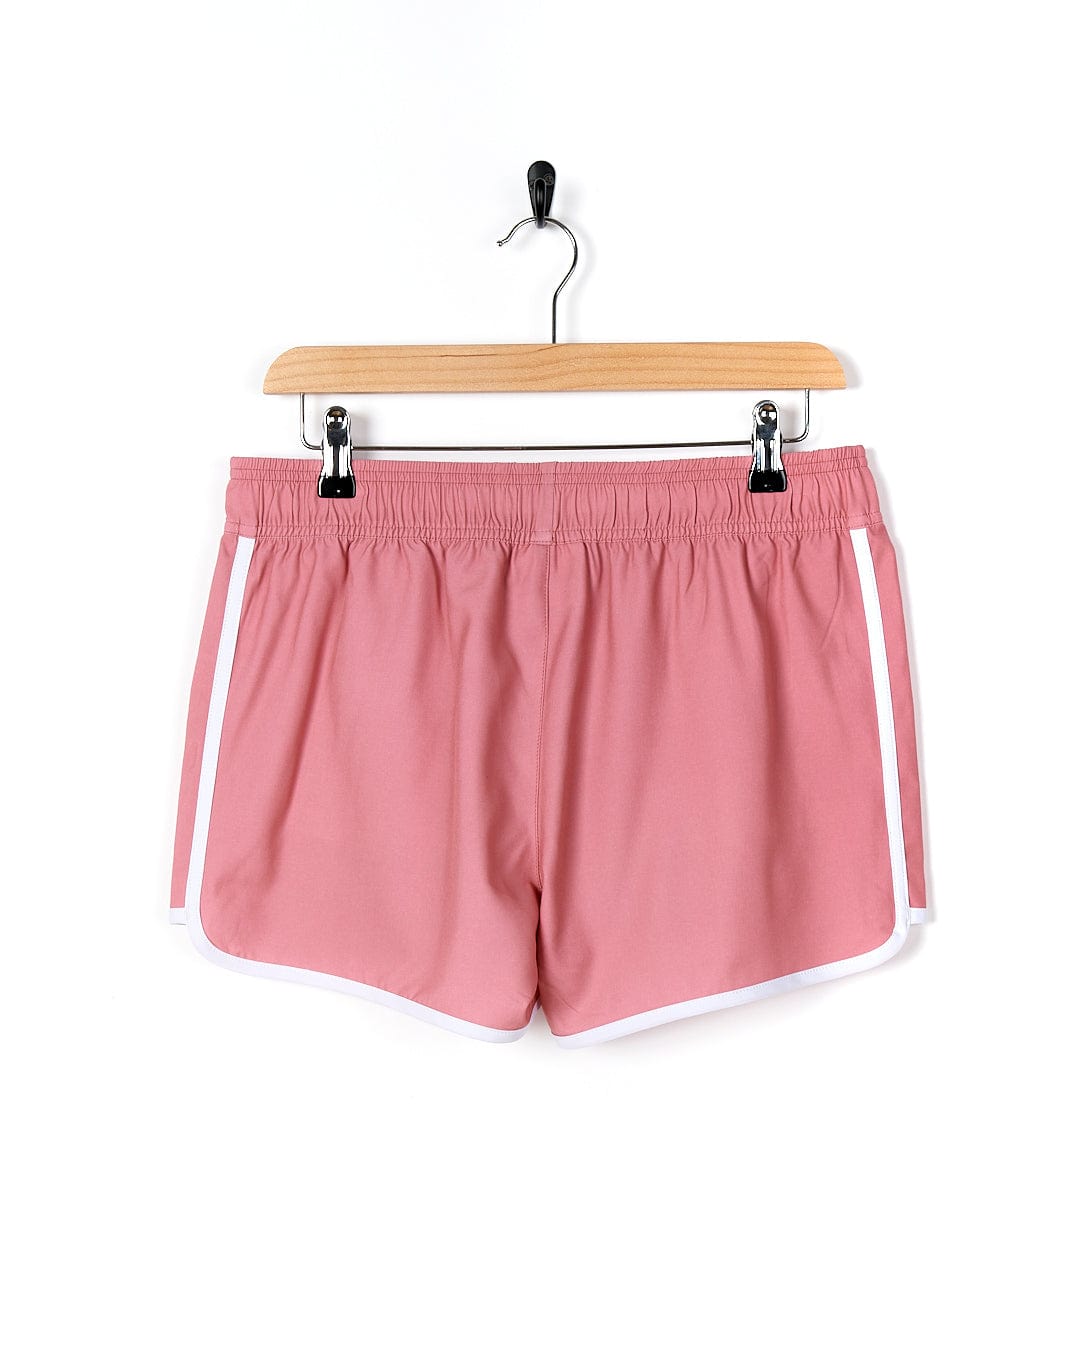 A Saltrock women's Fonte Volley - Womens Boardshort - Pink with an elasticated waist, ideal for the beach, hanging on a hanger.